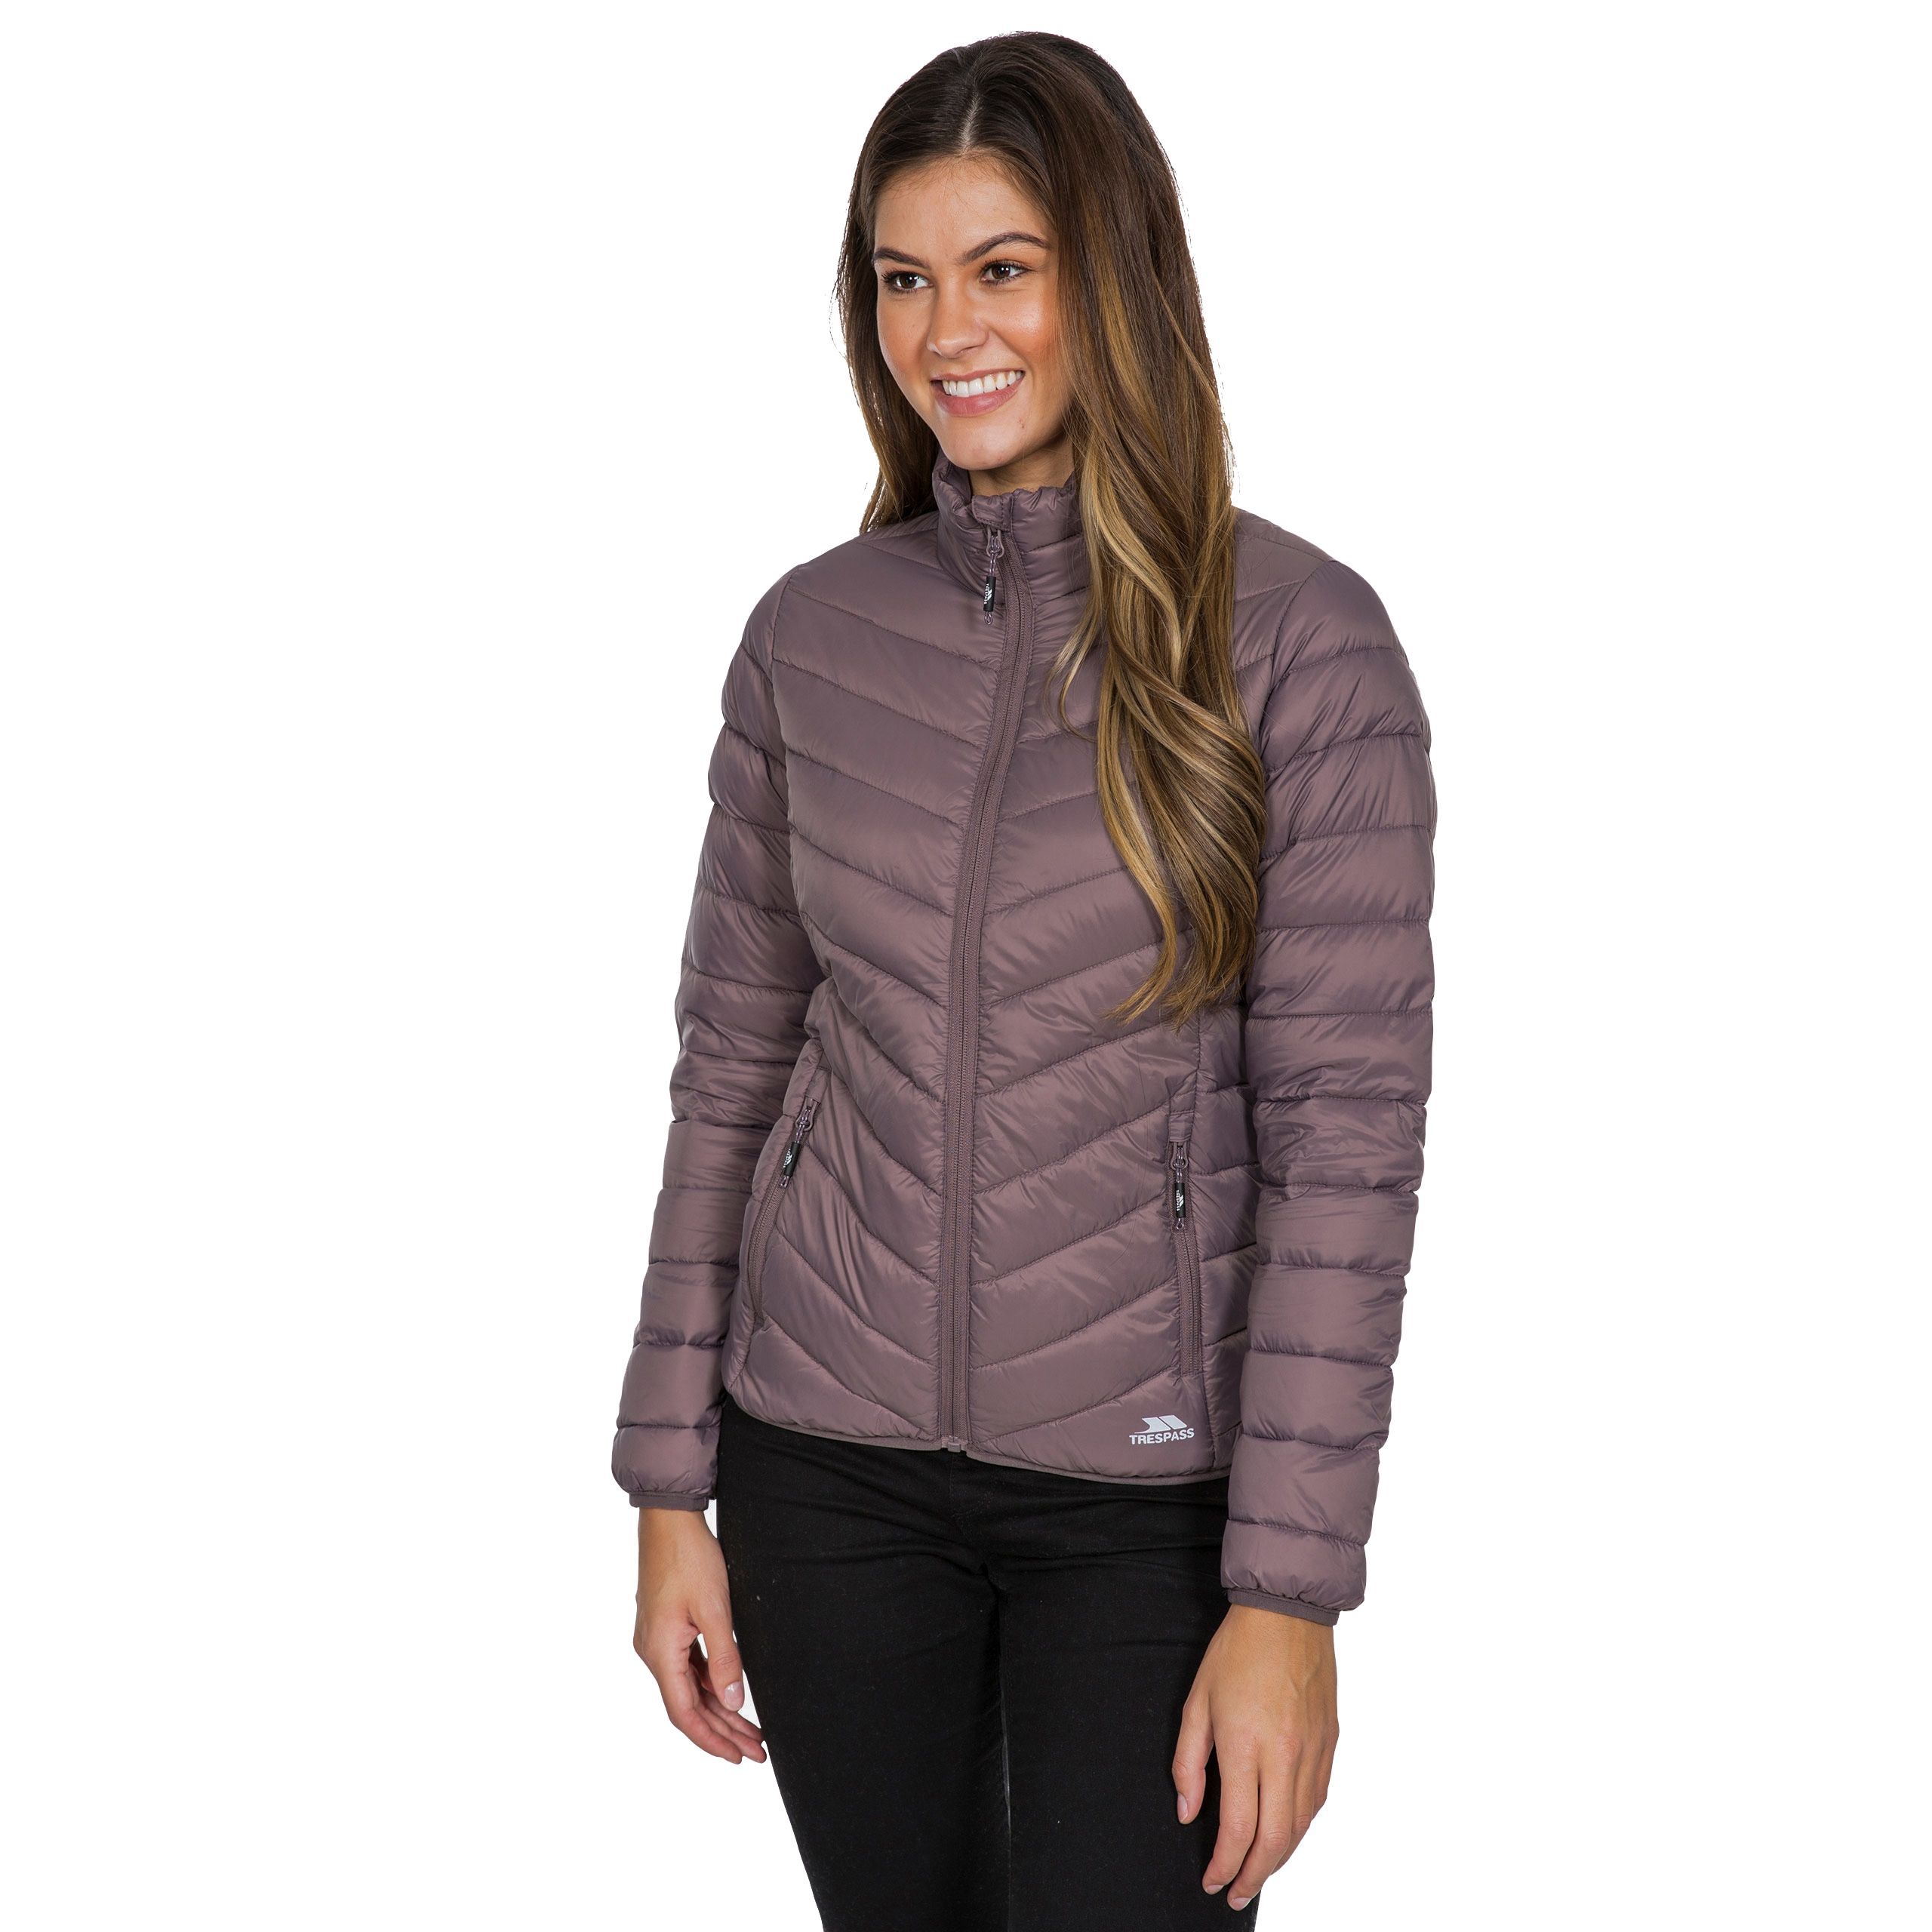 Ultra lightweight jacket. 2 lower zipped pockets. Low profile front zip. Matching binding at hem and cuffs. Stuff sack in pocket. Shell: 100% Polyamide, Lining: 100% Polyamide, Filling: 90% Down/10% Feather. Trespass Womens Chest Sizing (approx): XS/8 - 32in/81cm, S/10 - 34in/86cm, M/12 - 36in/91.4cm, L/14 - 38in/96.5cm, XL/16 - 40in/101.5cm, XXL/18 - 42in/106.5cm.